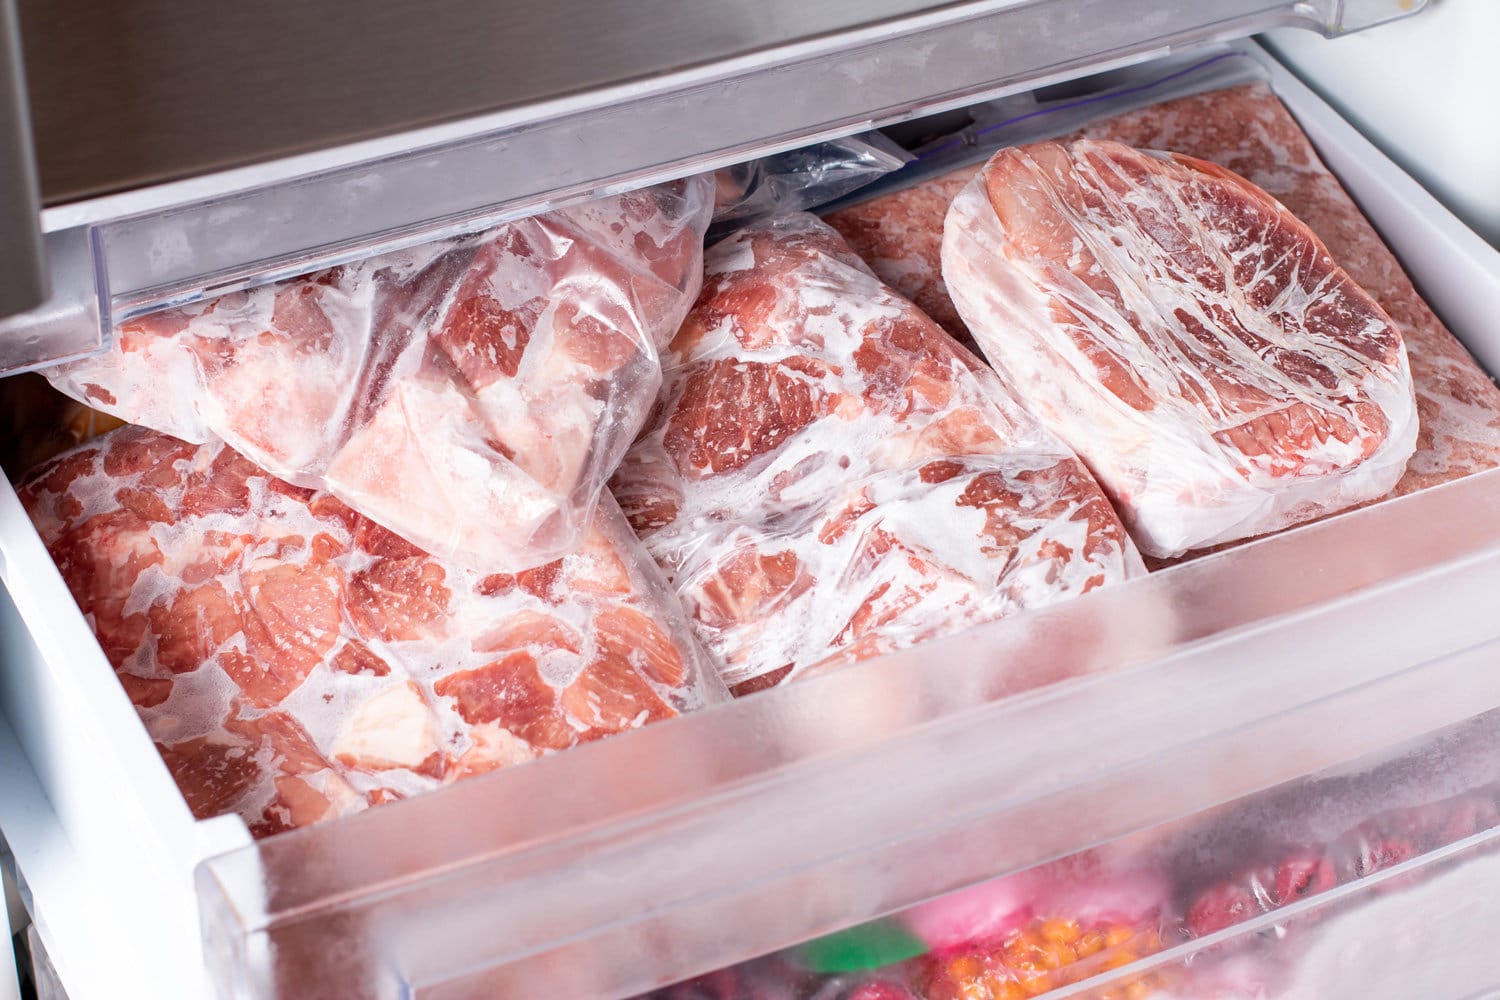 Meat in refrigerator freezer background. Closeup pork, meat and chicken leg in freezing compartment. Frozen food